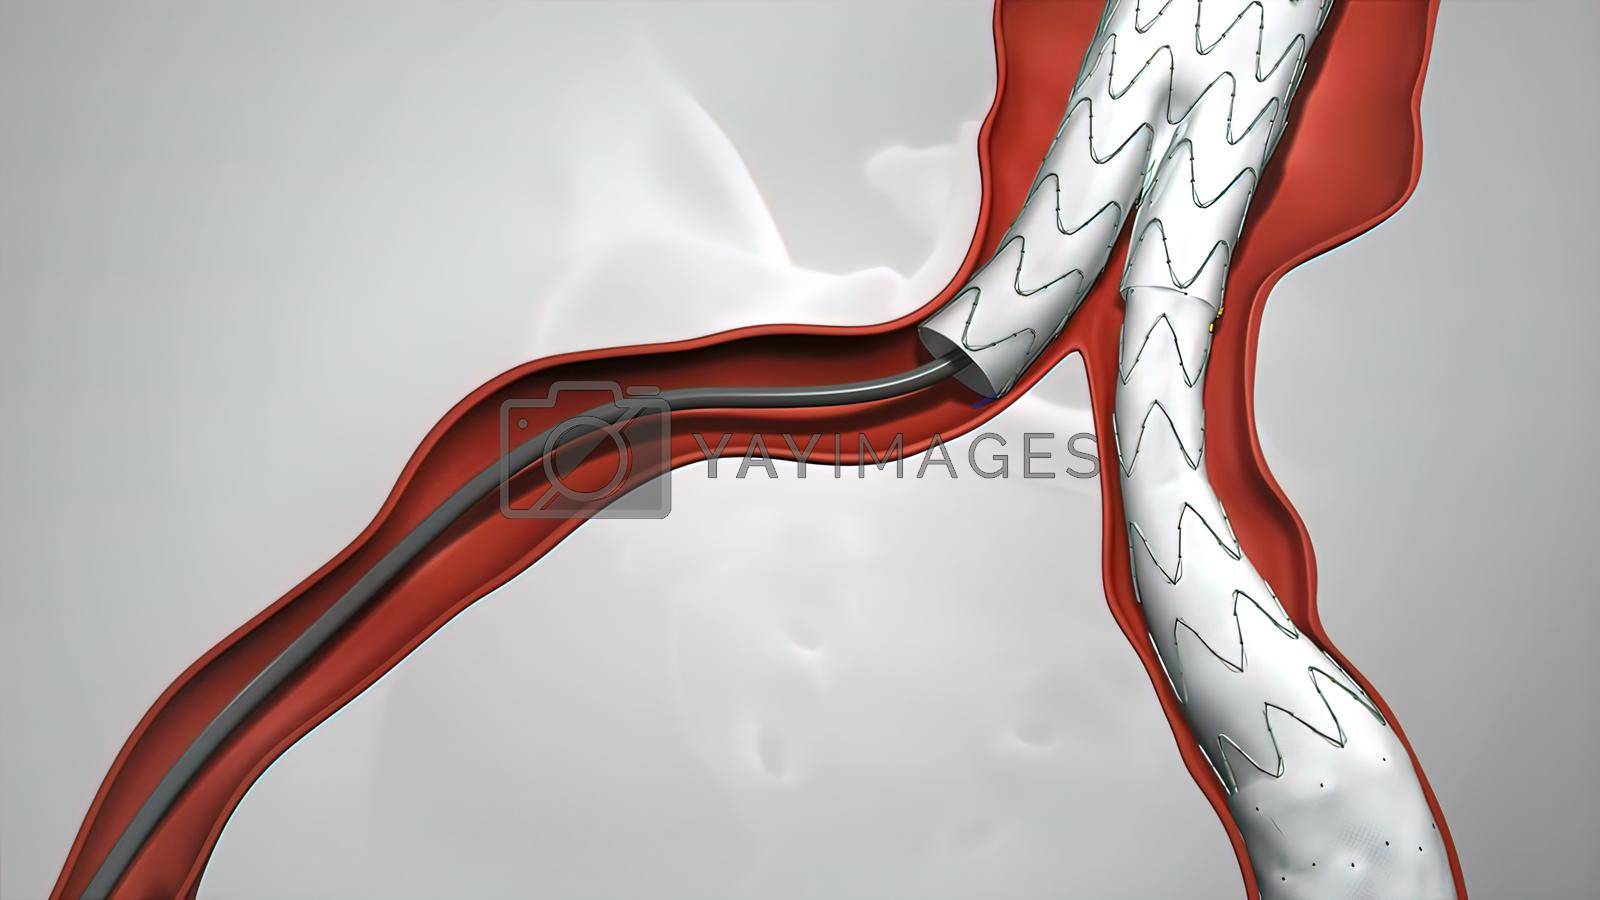 Royalty free image of balloon angioplasty procedure with stent in vein by creativepic